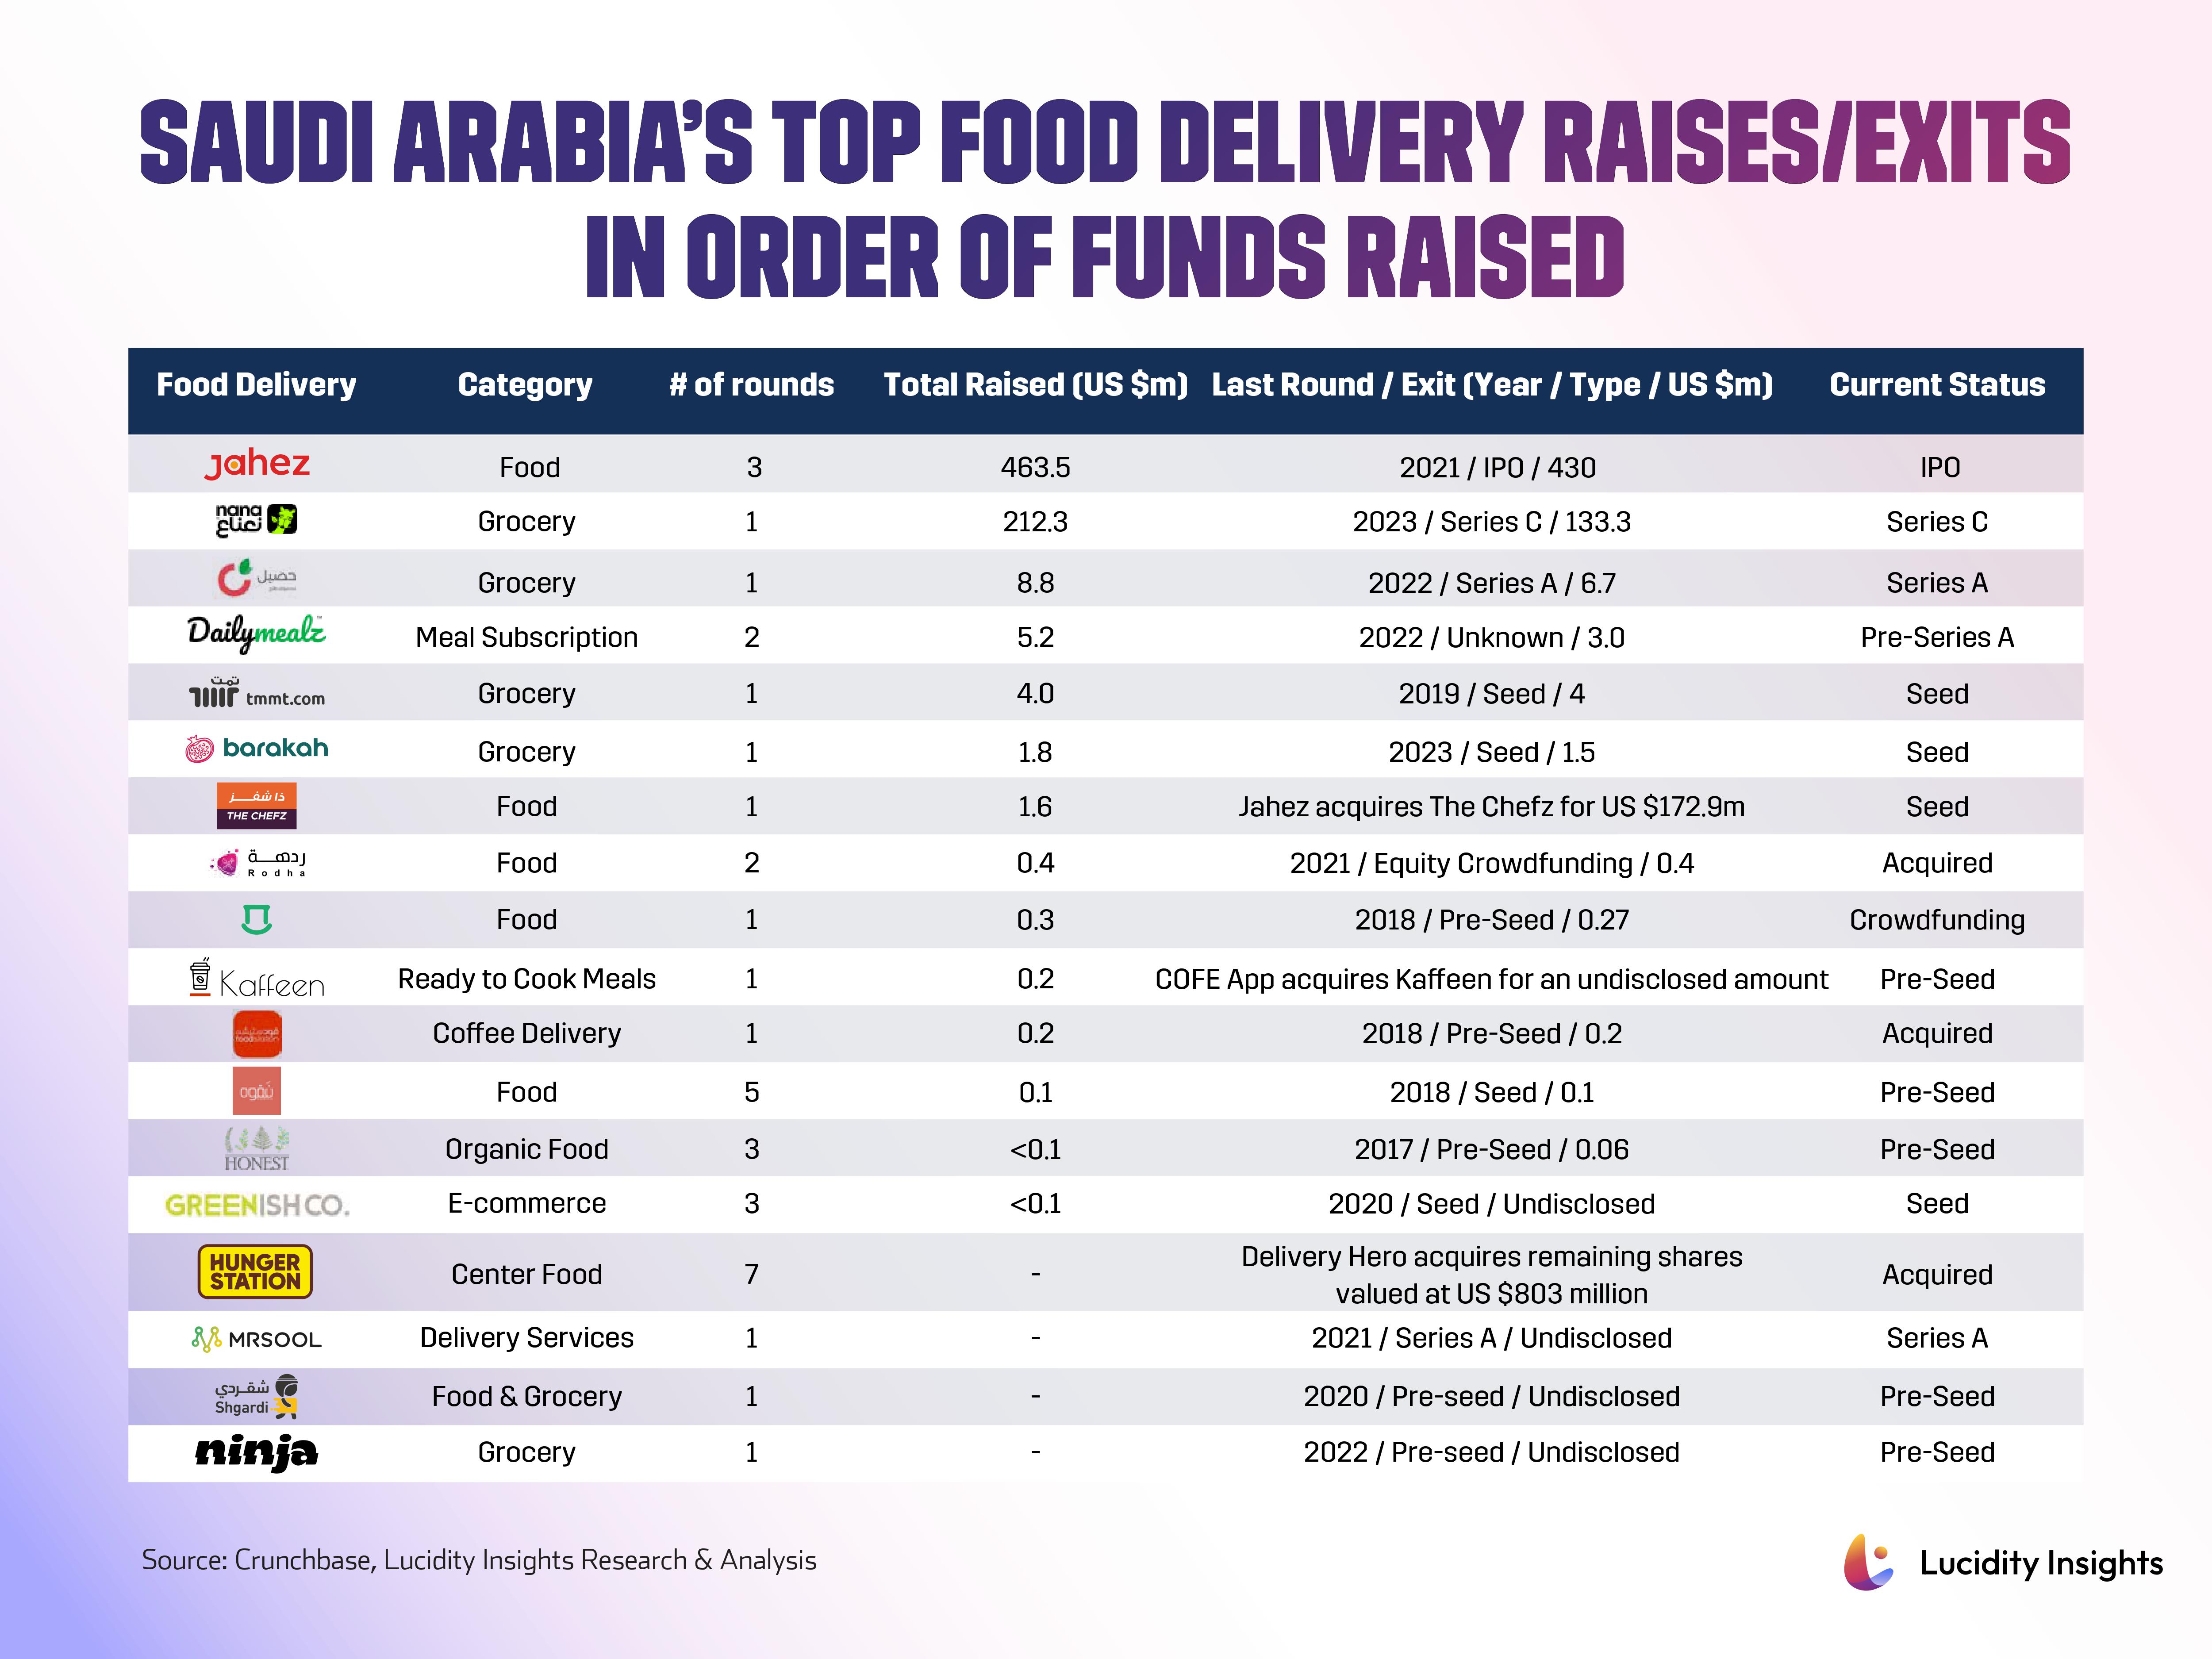 Saudi Arabia’s Top Food Delivery Raises/Exits in Order of Funds Raised